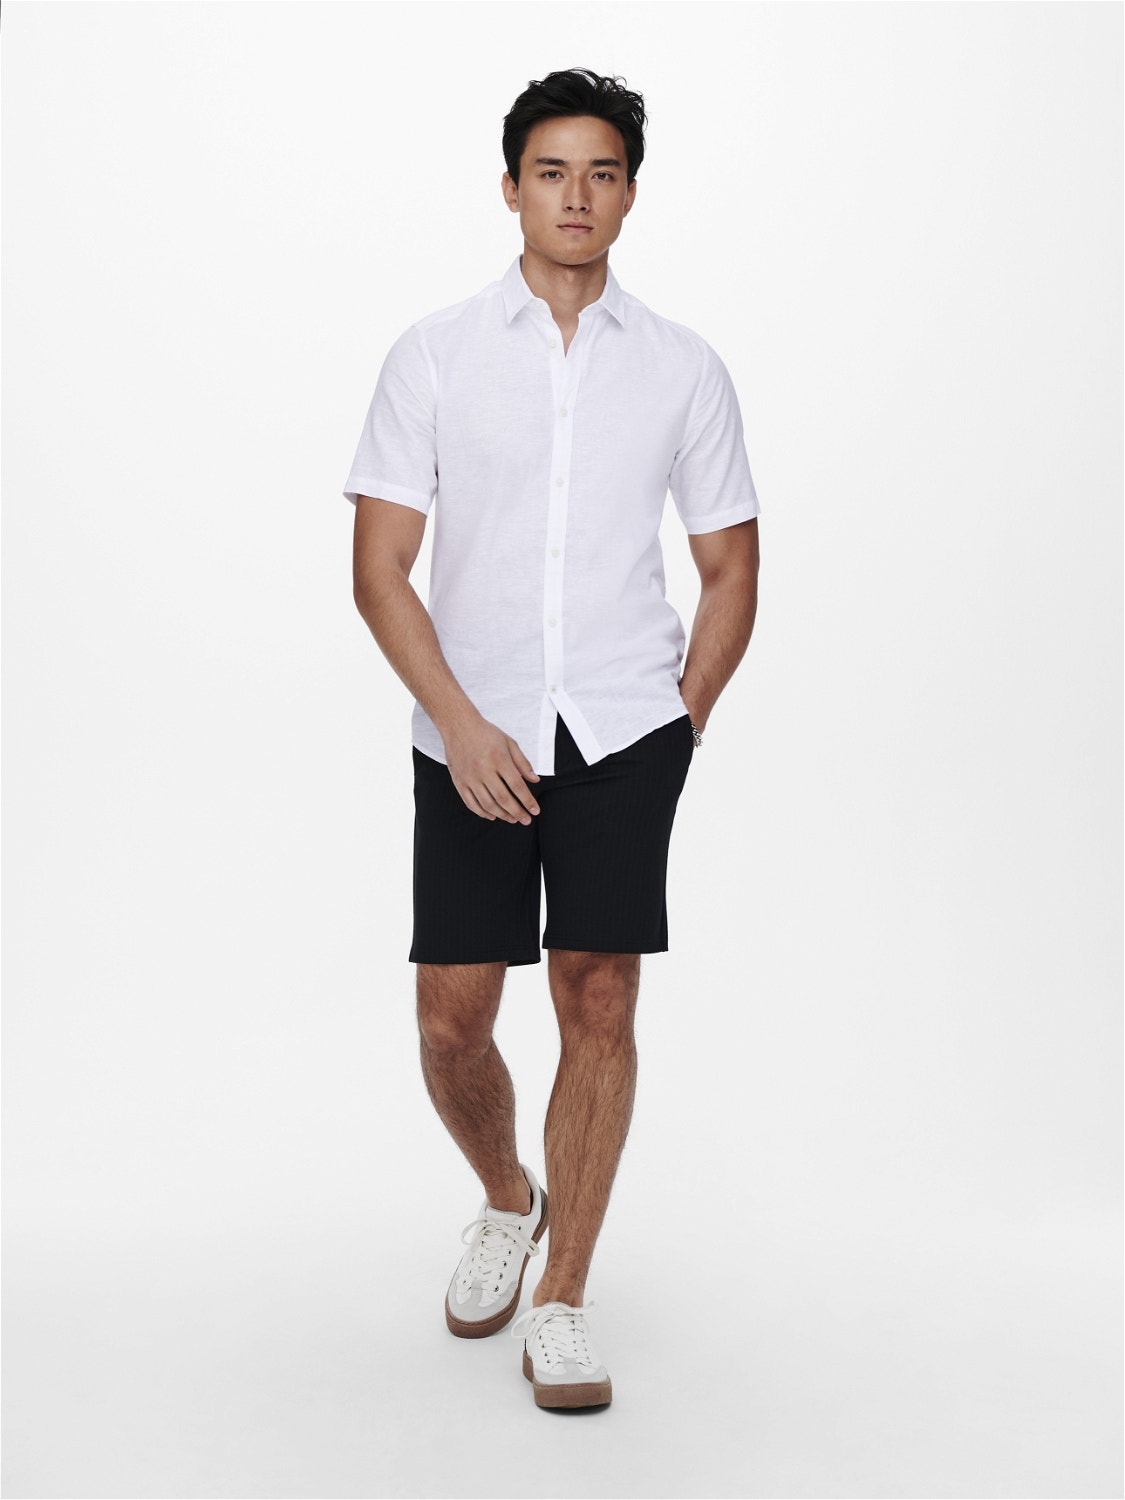 ONLY & SONS Short sleeved slim fit shirt -White - 22009885